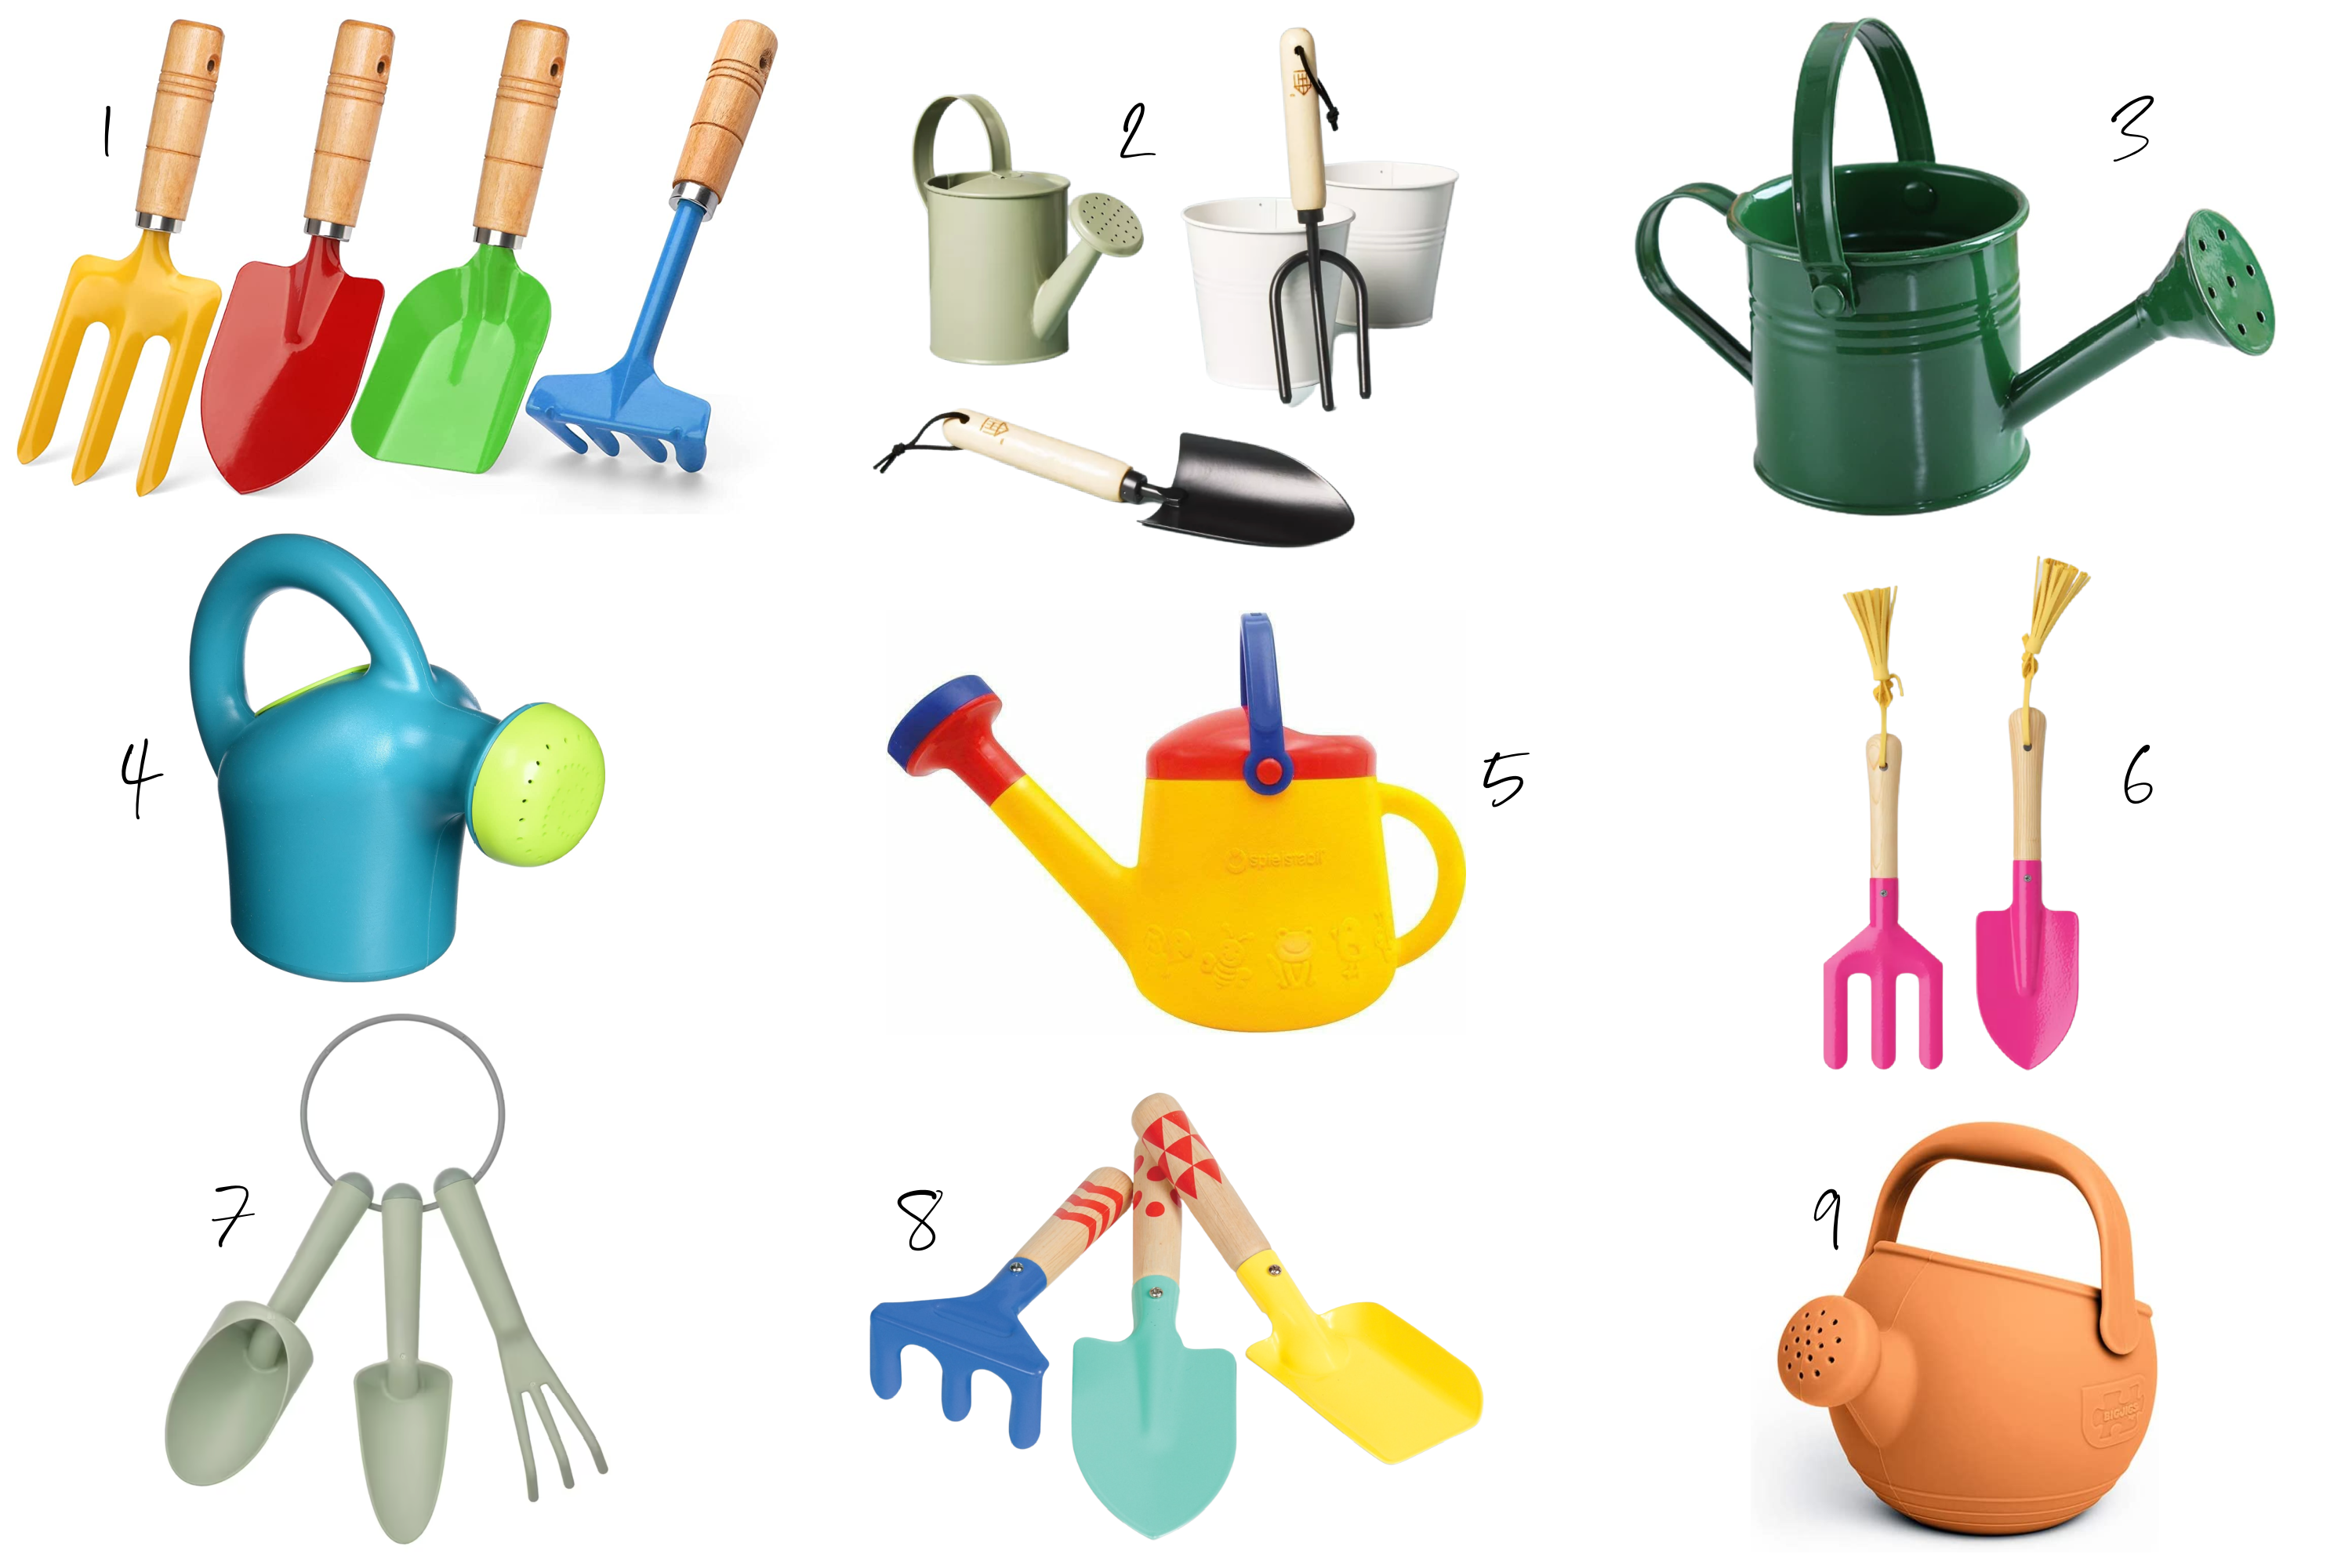 A collage of child sized and Montessori friendly gardening tools and watering cans for children.